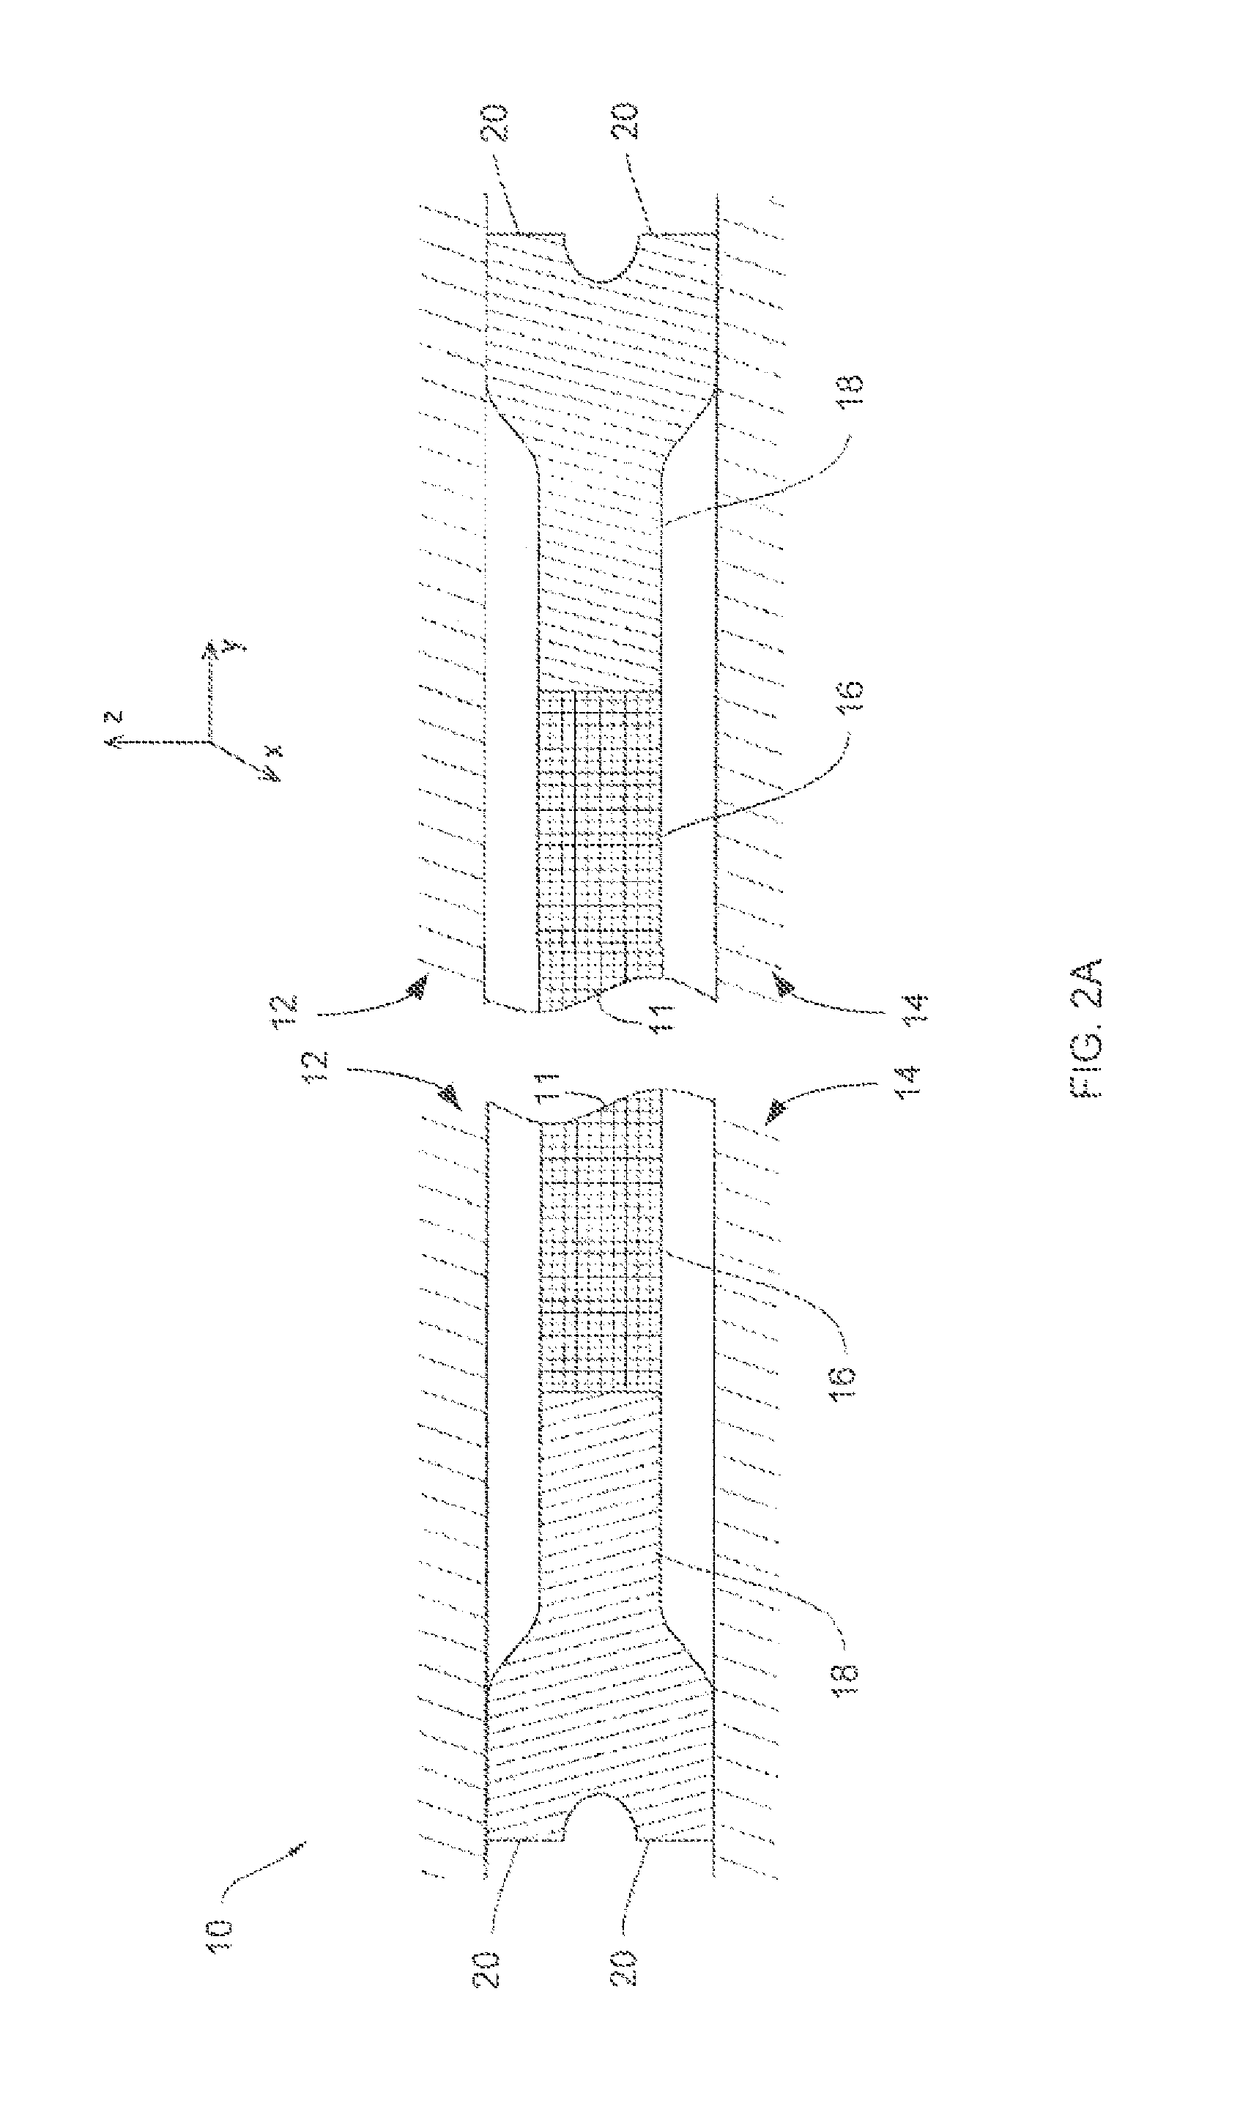 Deflectable conductive gasket with environmental seal